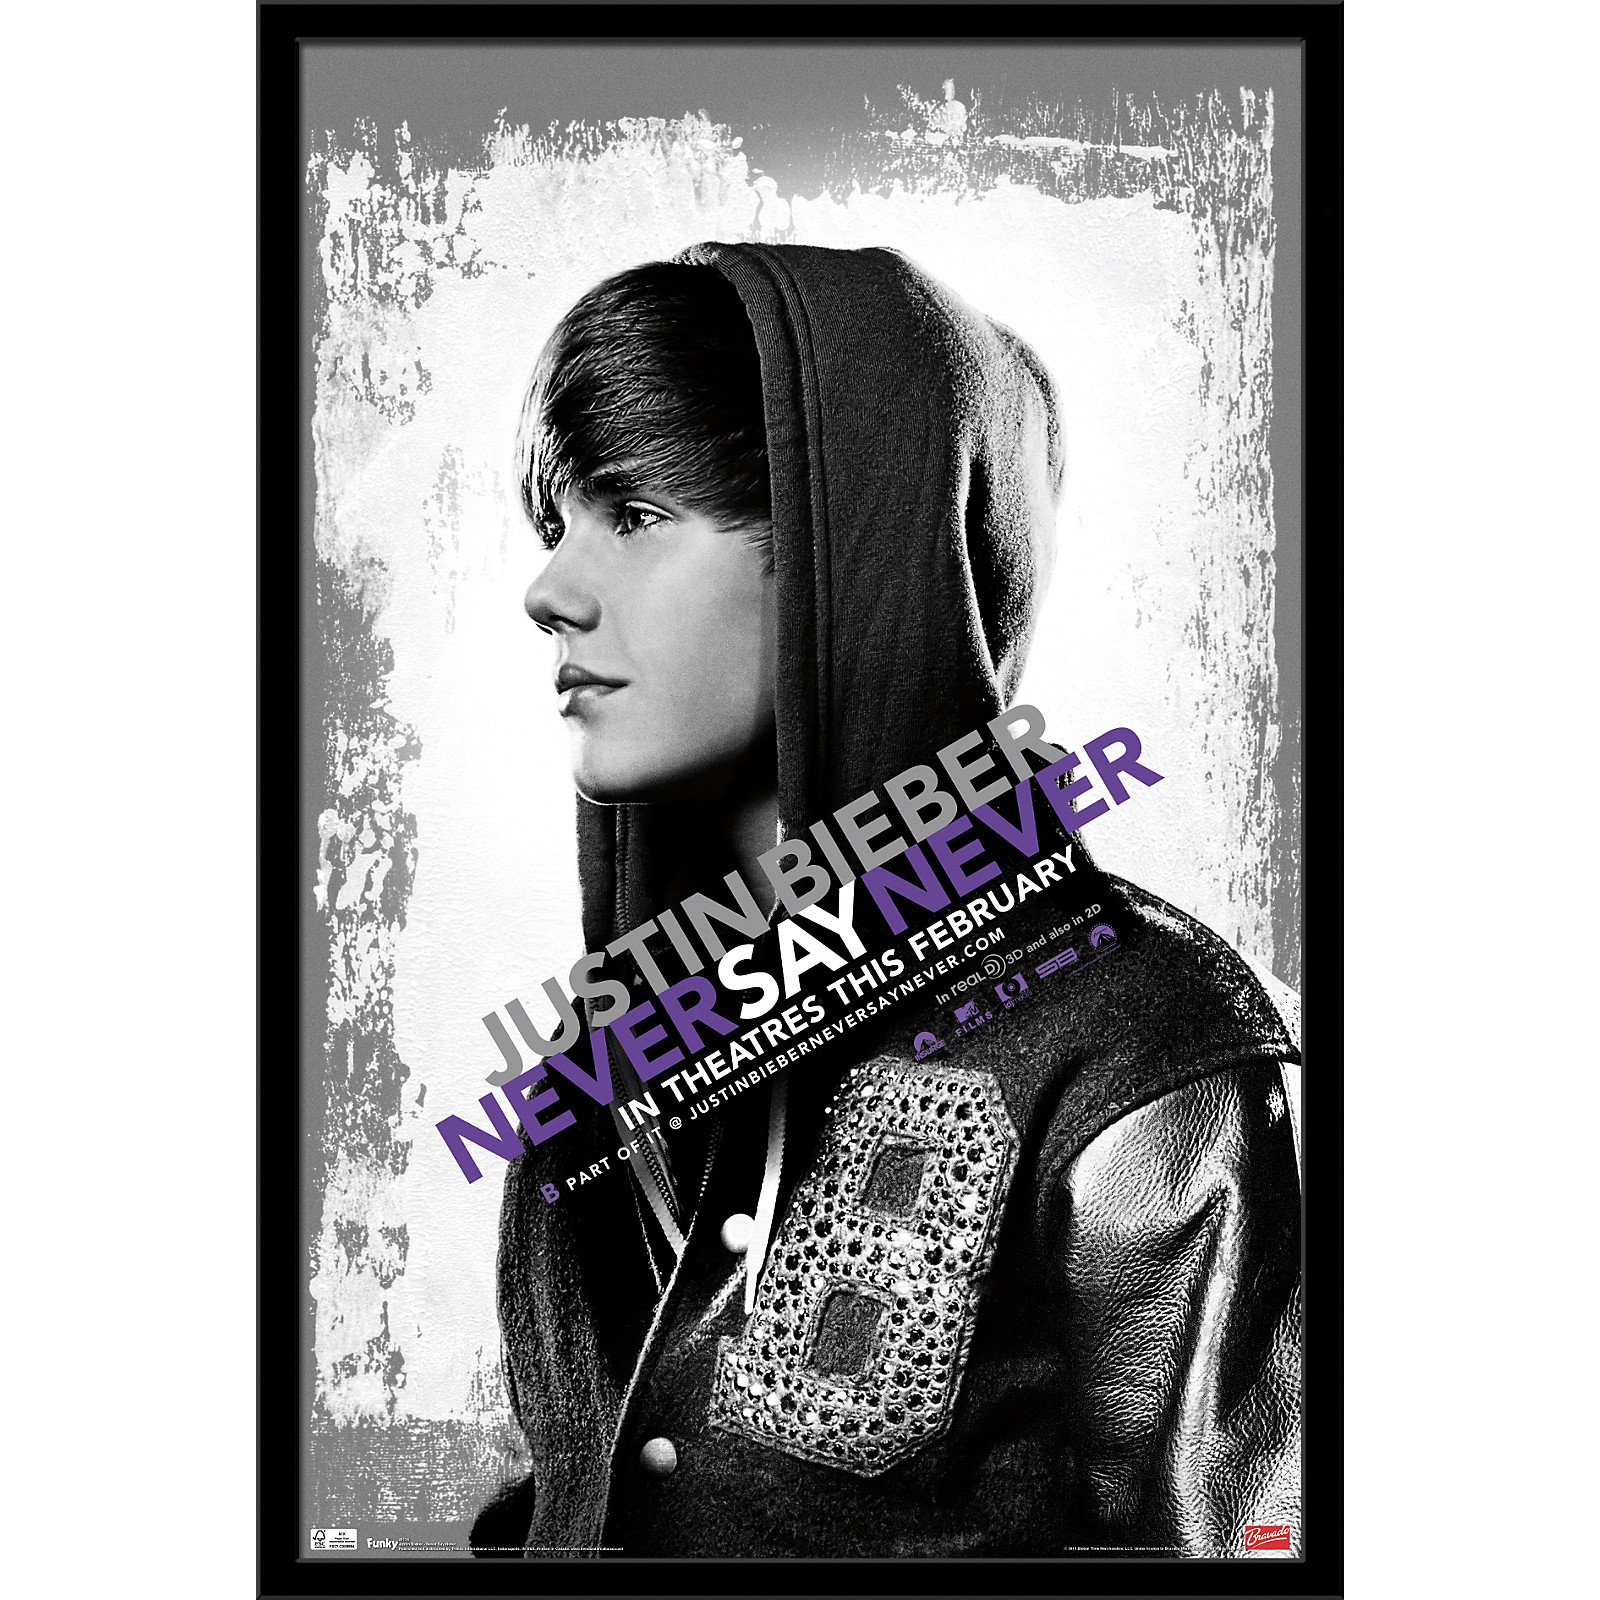 Have a never be the say. Джастин Бибер Невер сей Невер. Never say never - the Remixes Джастин Бибер. Never say never never say Forever.